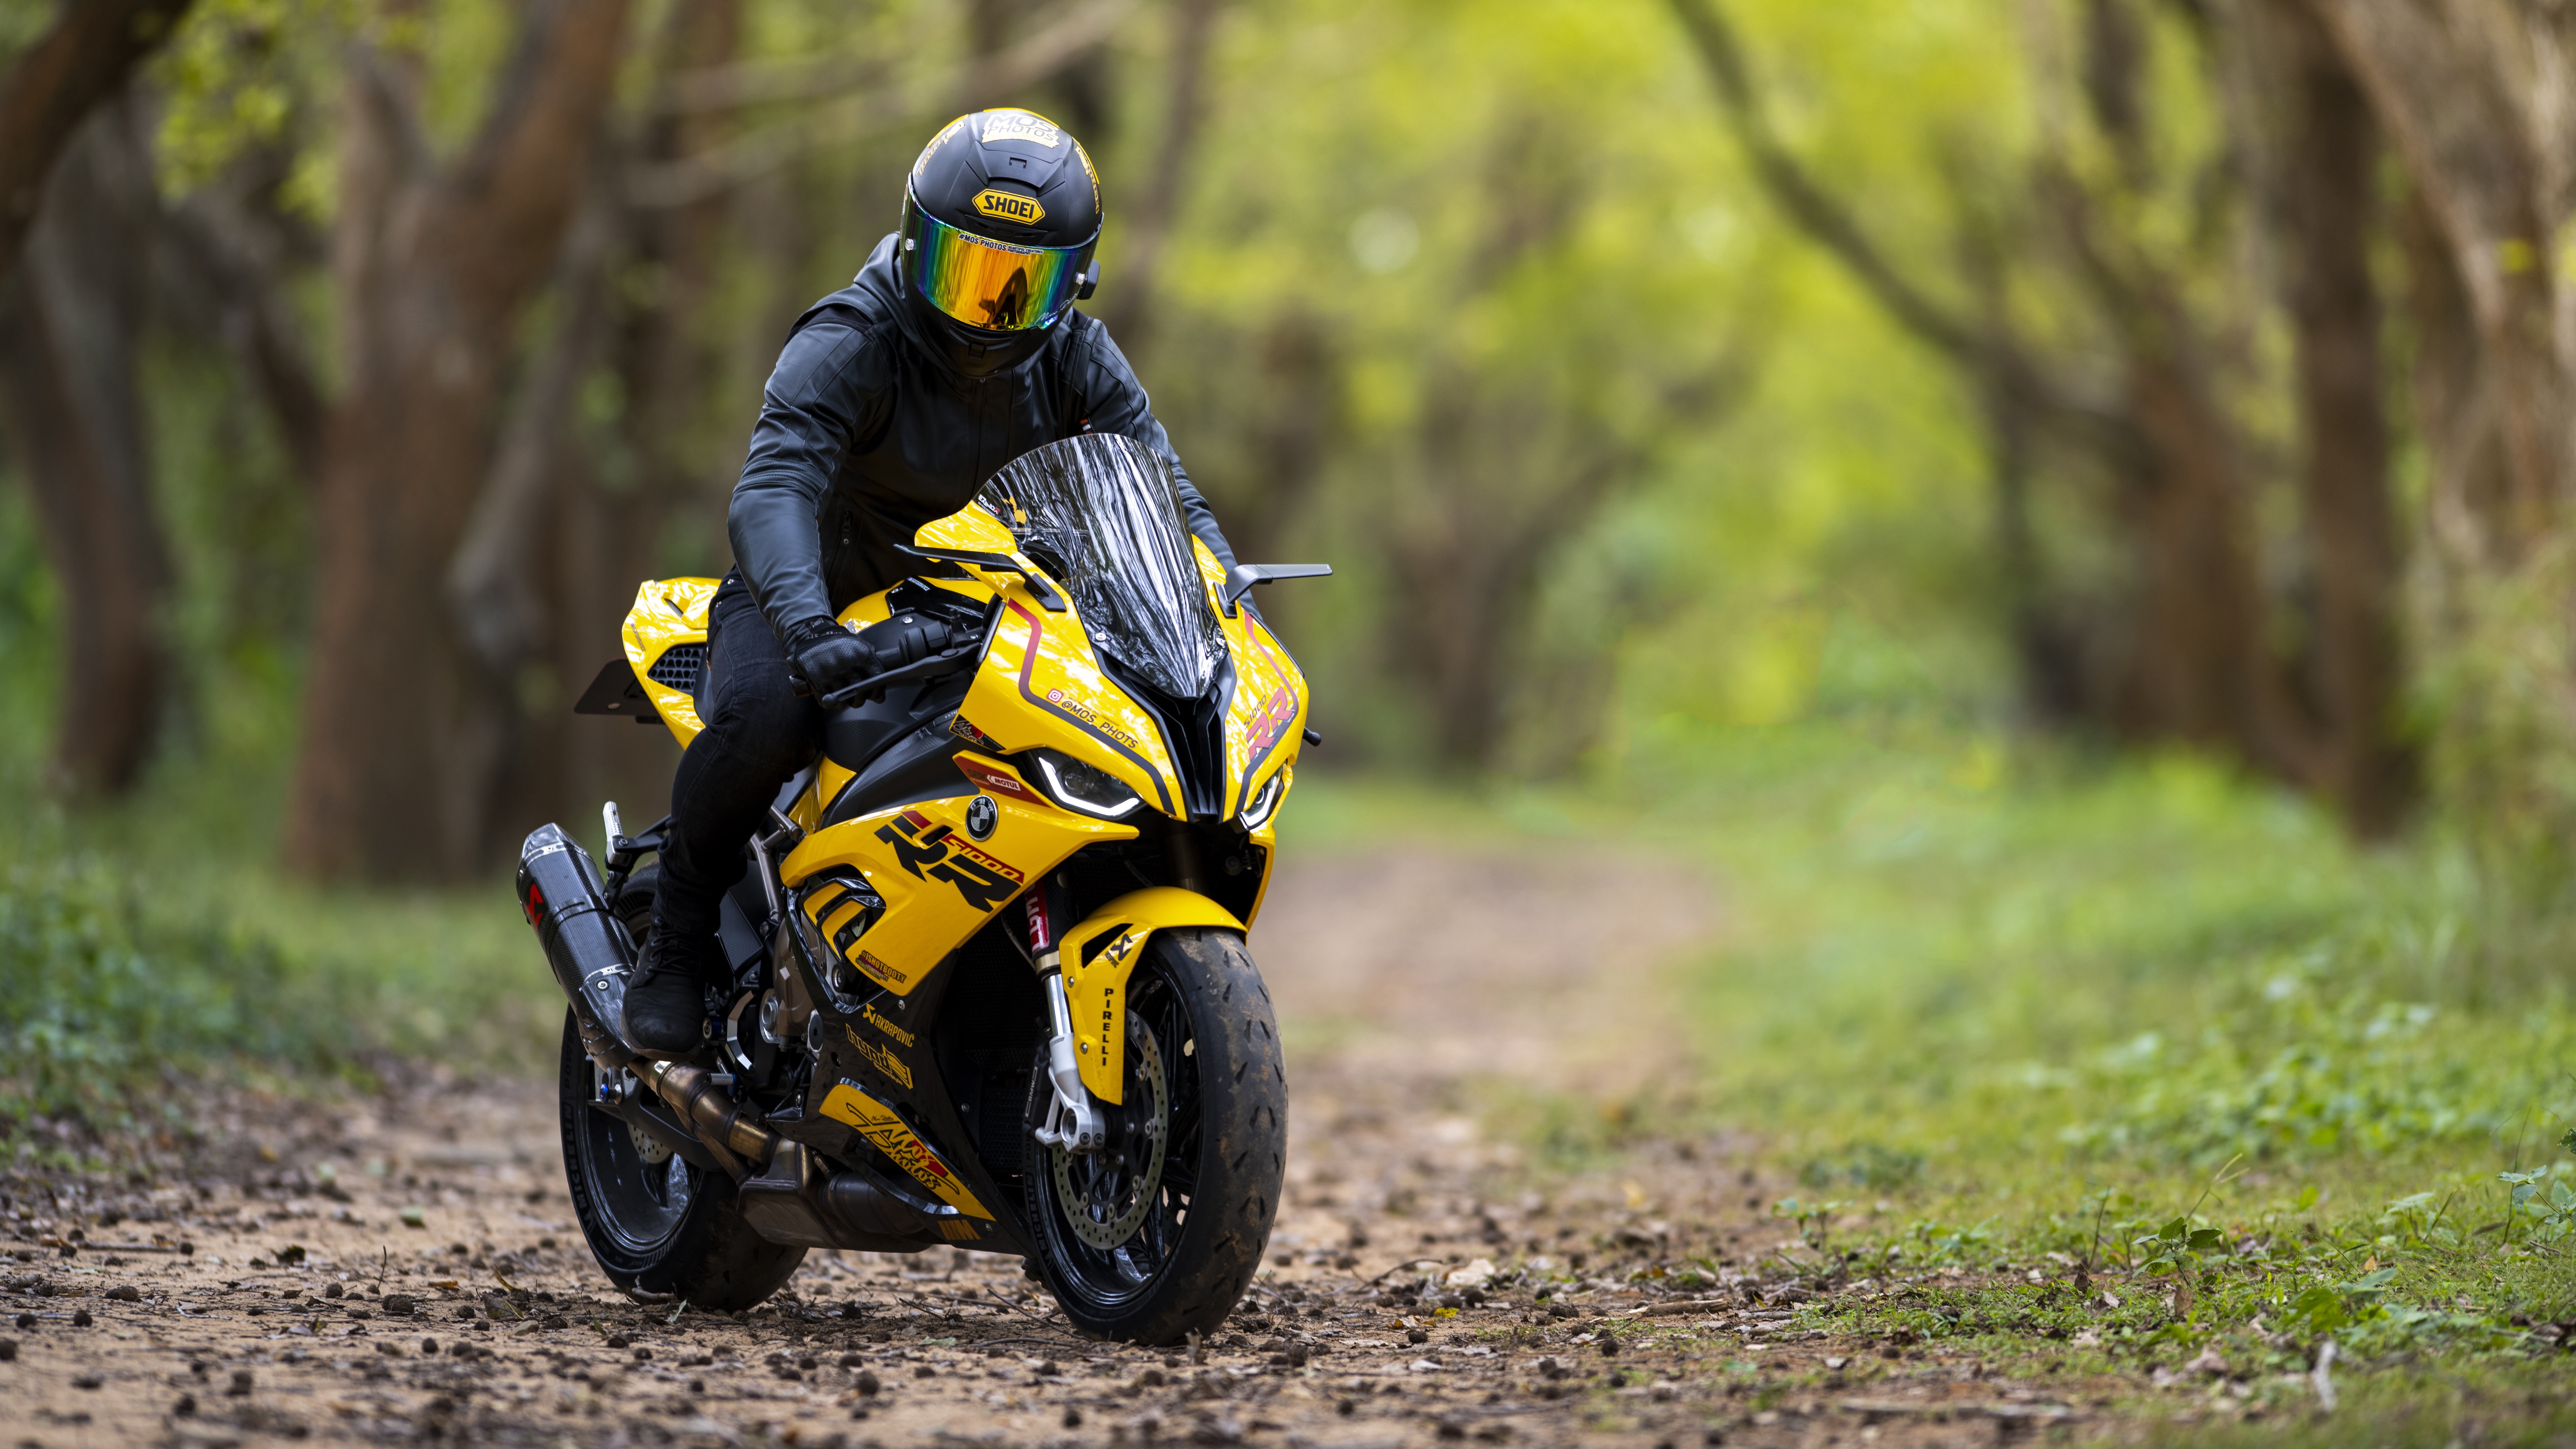 Bmw S1000rr Motorcycle 6144x3456